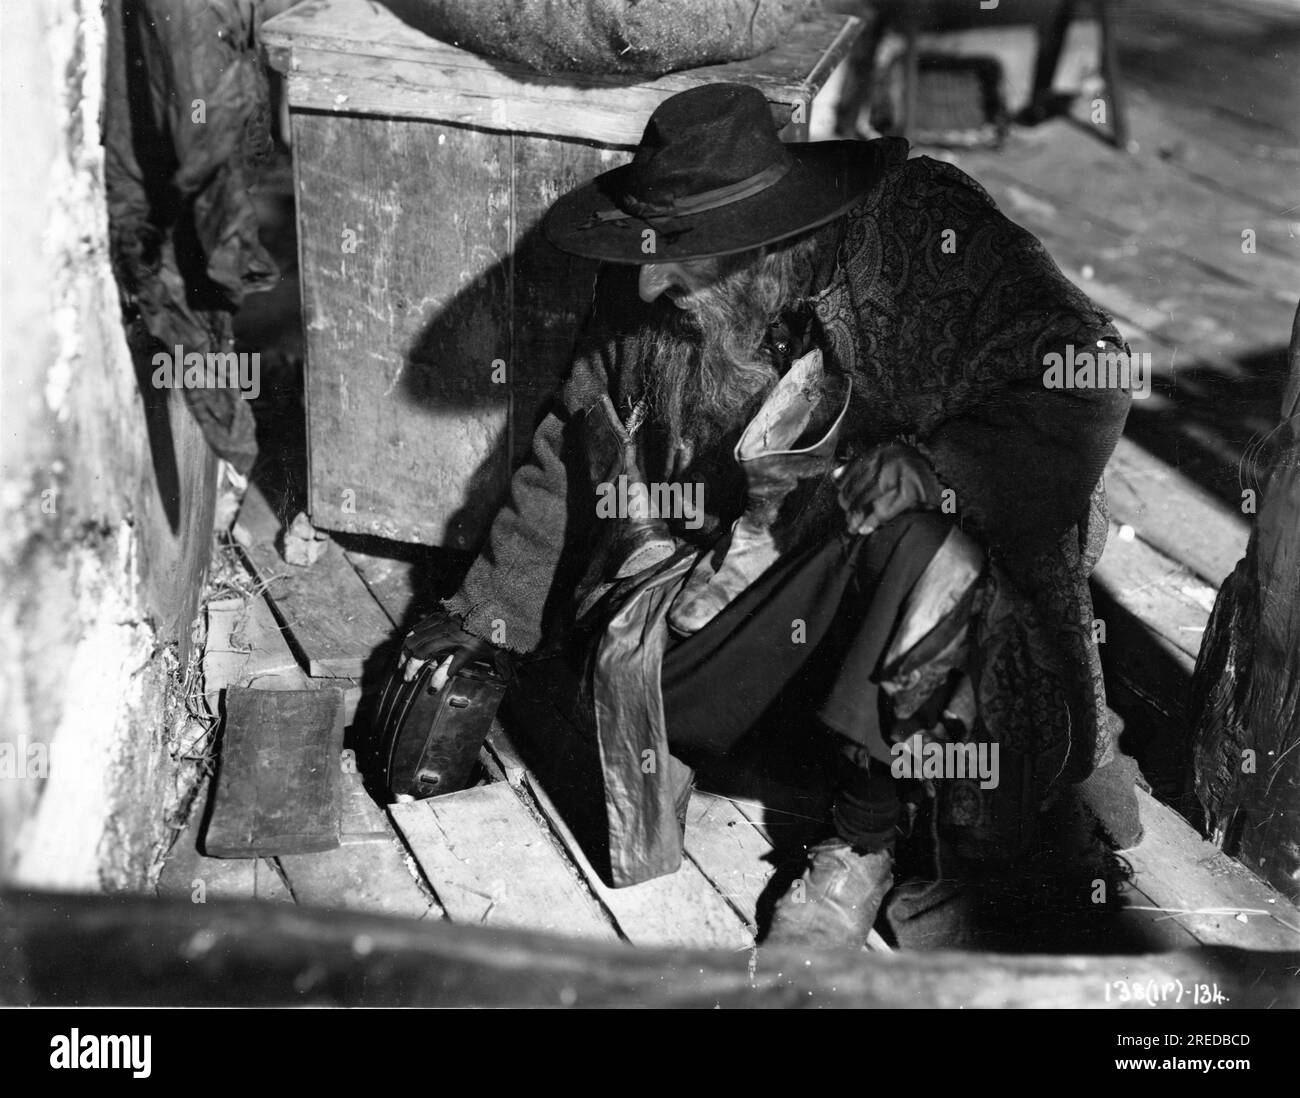 ALEC GUINNESS as Fagin hiding his money in OLIVER TWIST 1948 director DAVID LEAN novel Charles Dickens producer Ronald Neame Cineguild / General Film Distributors (GFD) Stock Photo